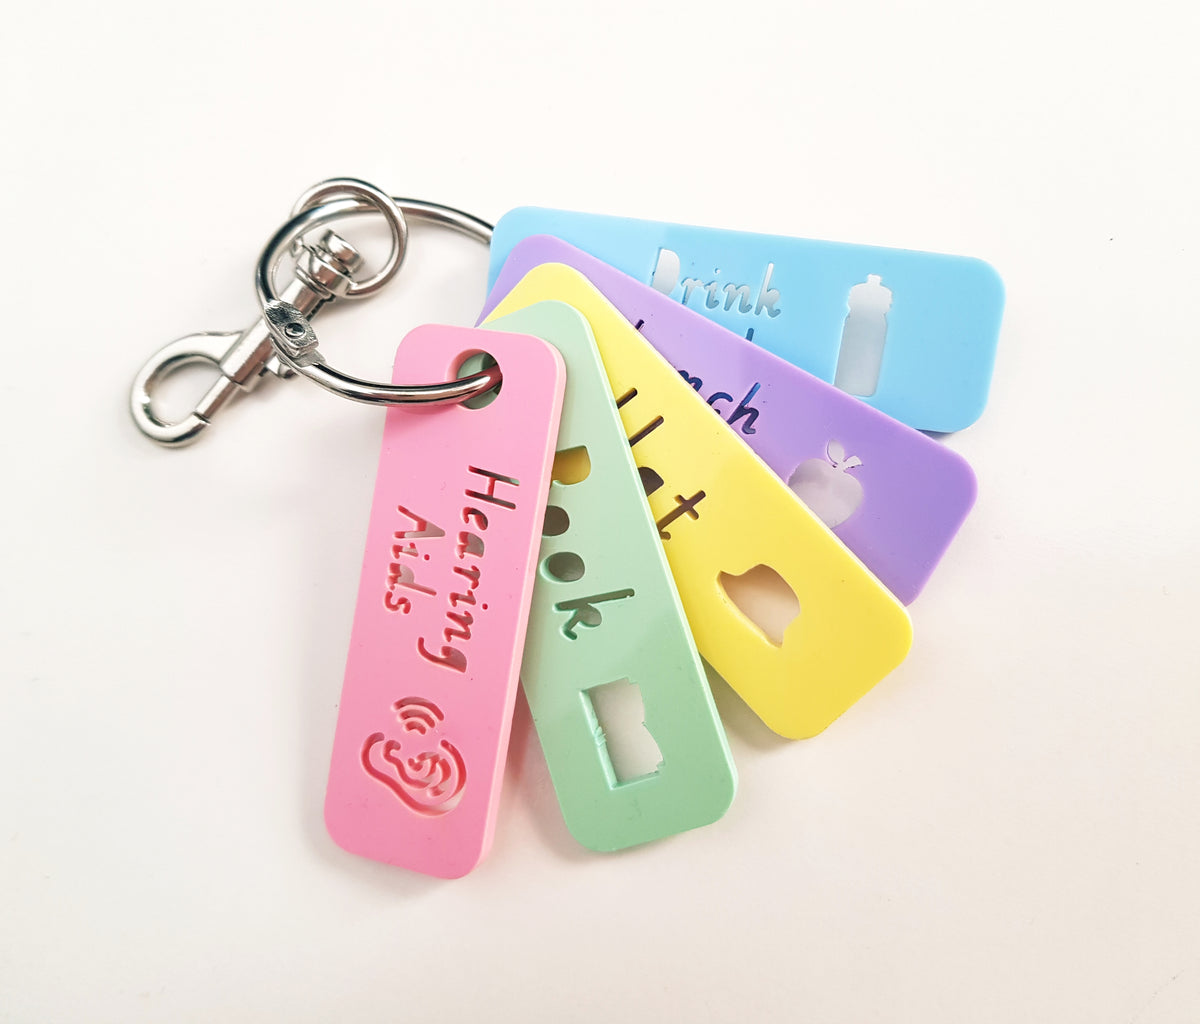 End of day checklist bag tags